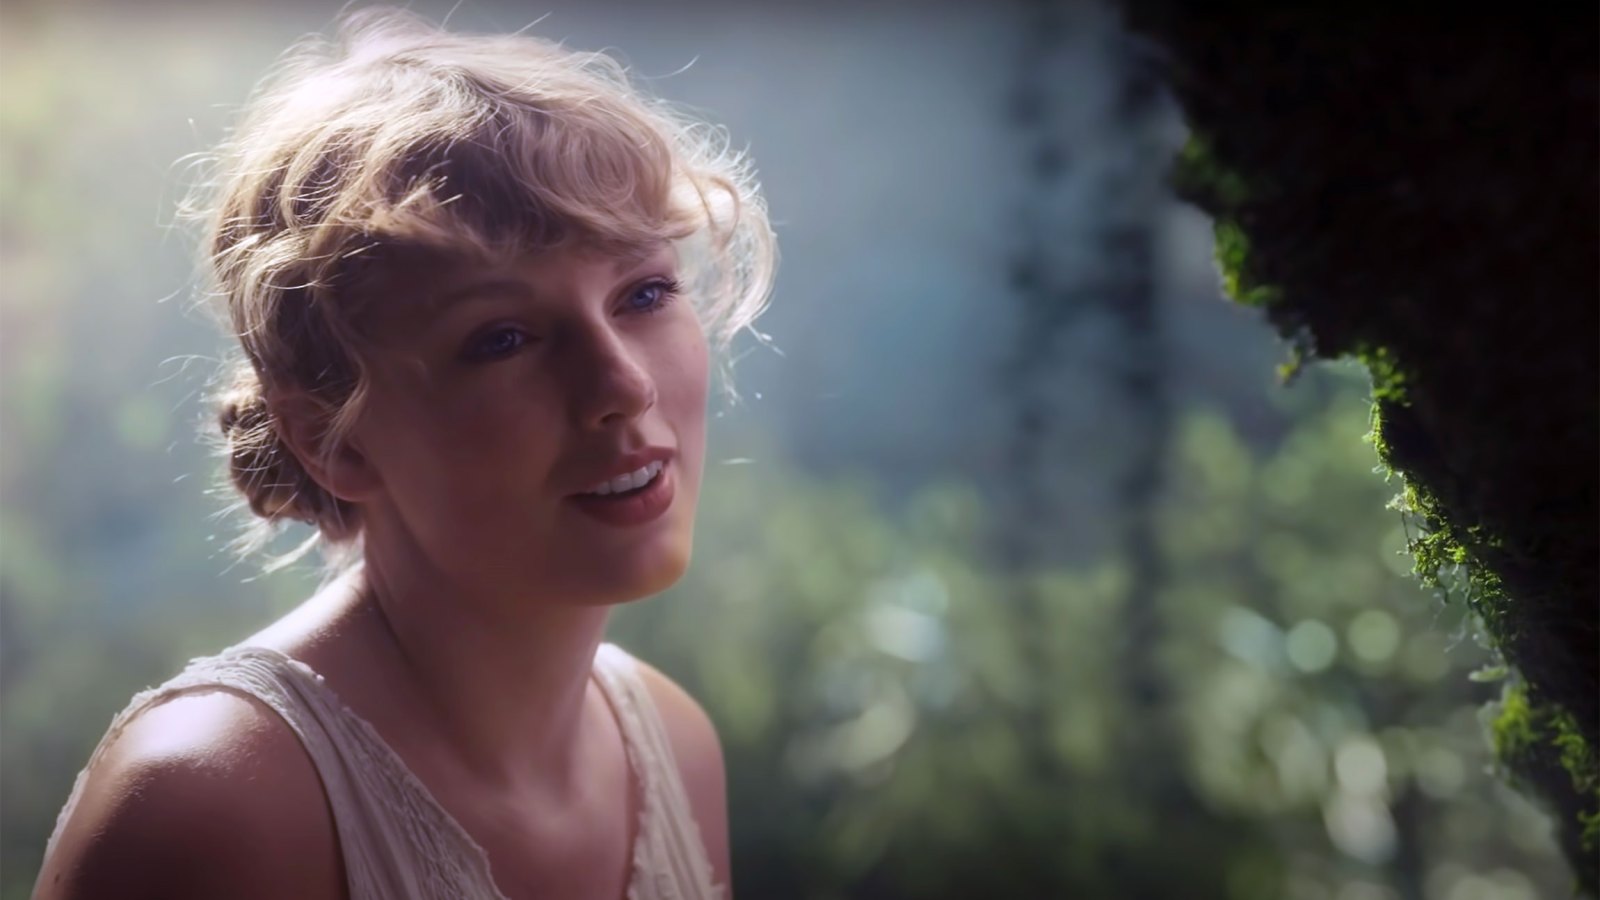 Taylor Swift Did Her Own Hair and Makeup for the 'Cardigan' Music Video